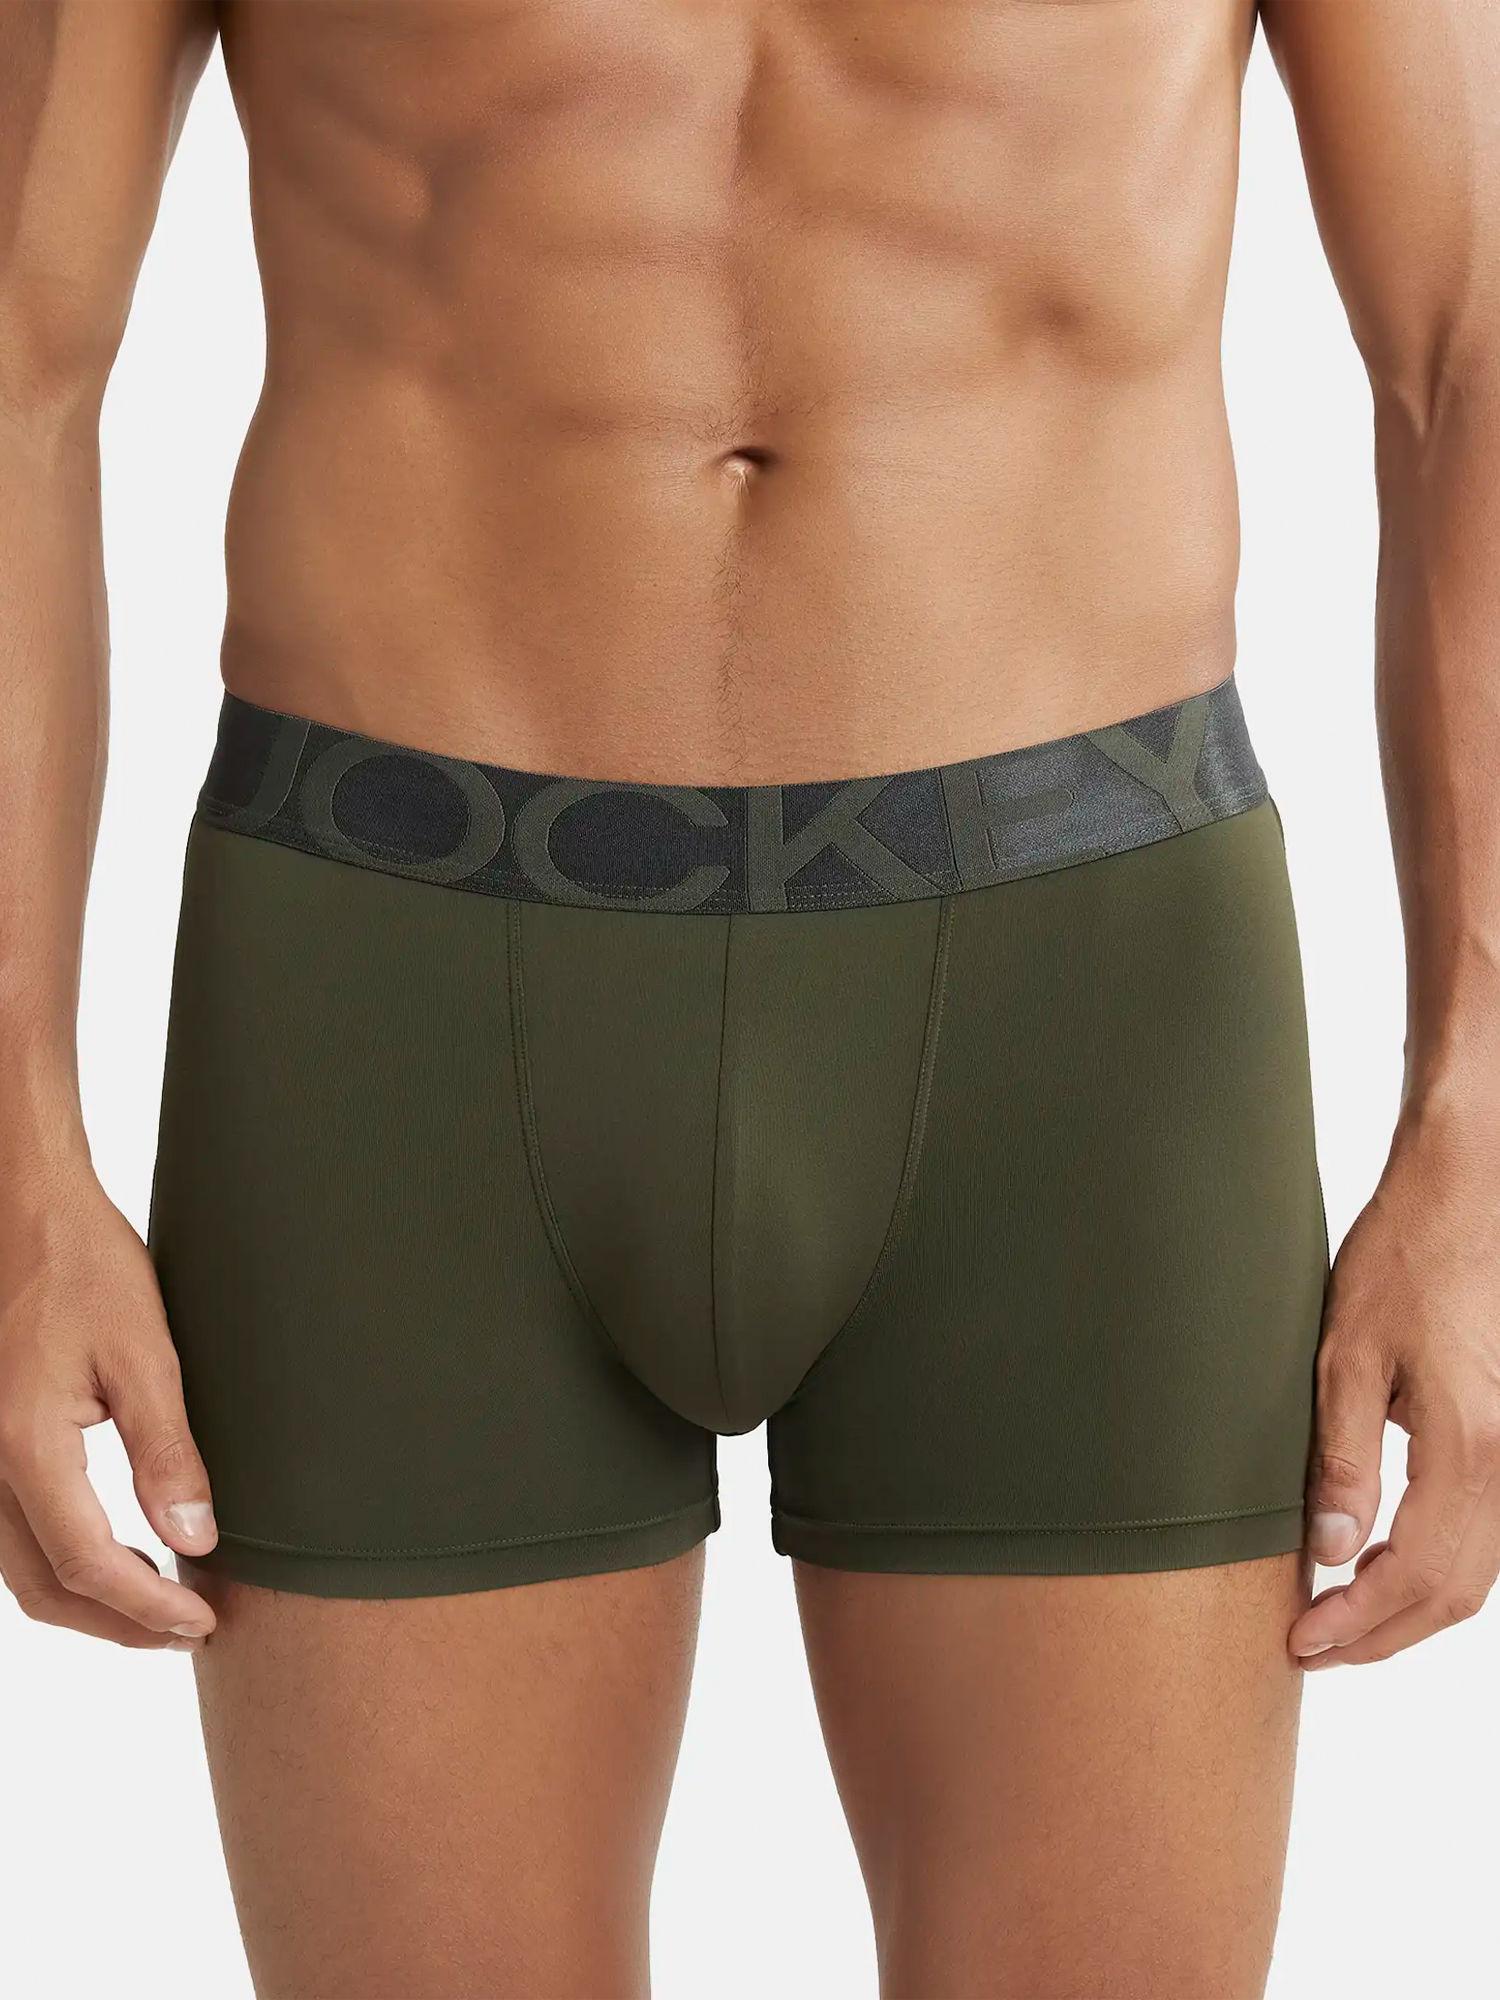 forest night ultra soft trunk